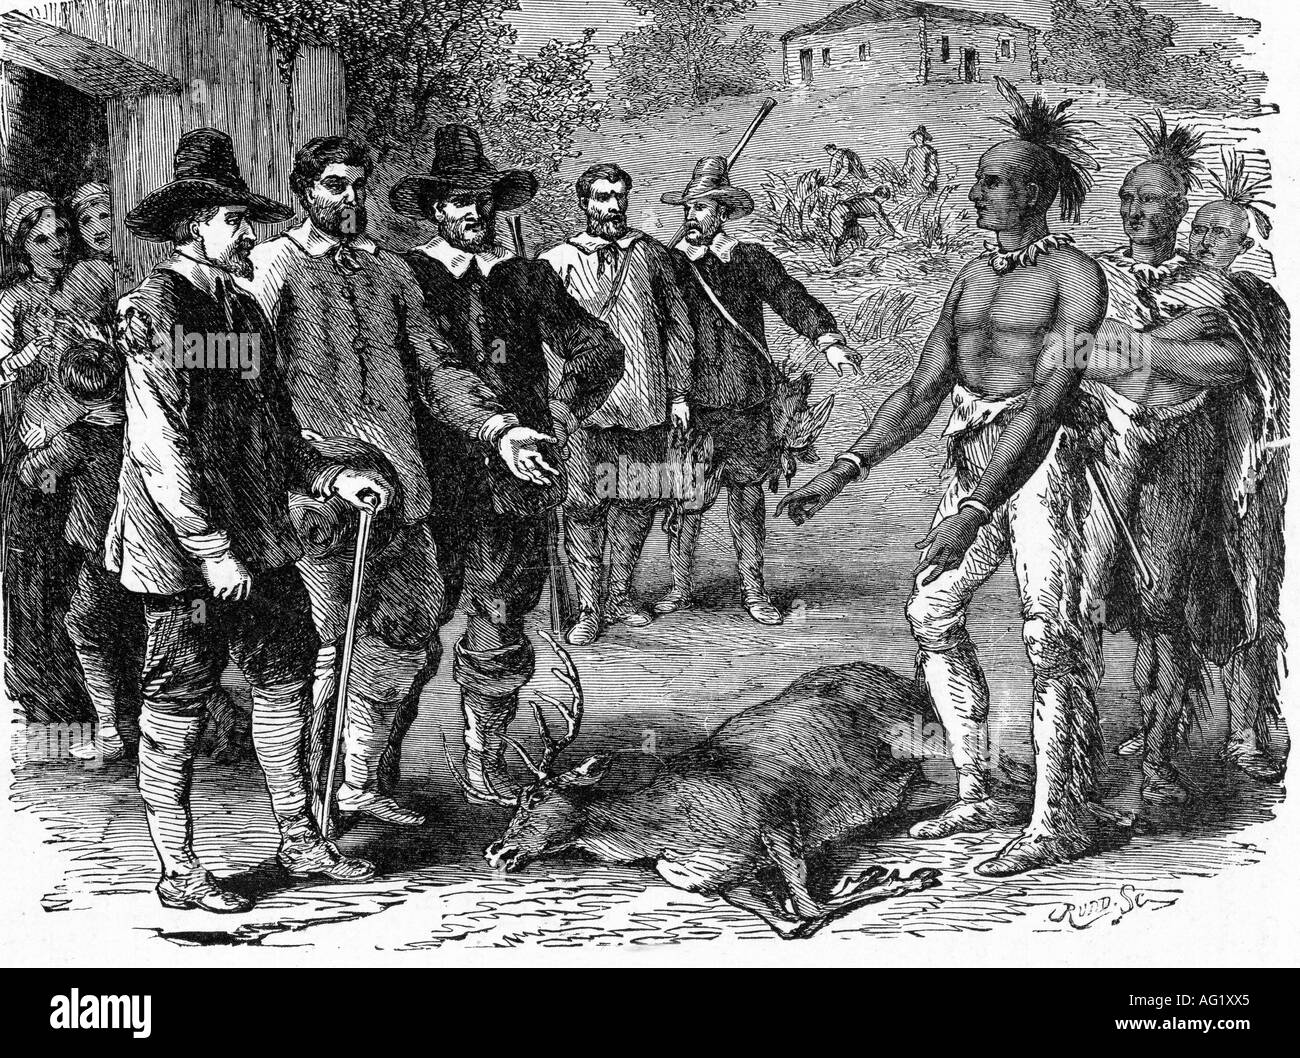 geography/travel, USA, people, Pilgrim Fathers, trading with Native Americans, History painting, engraving, 19th century, puritans, American Indians, settlers, 17th century, deer, North America, historic, historical, Stock Photo